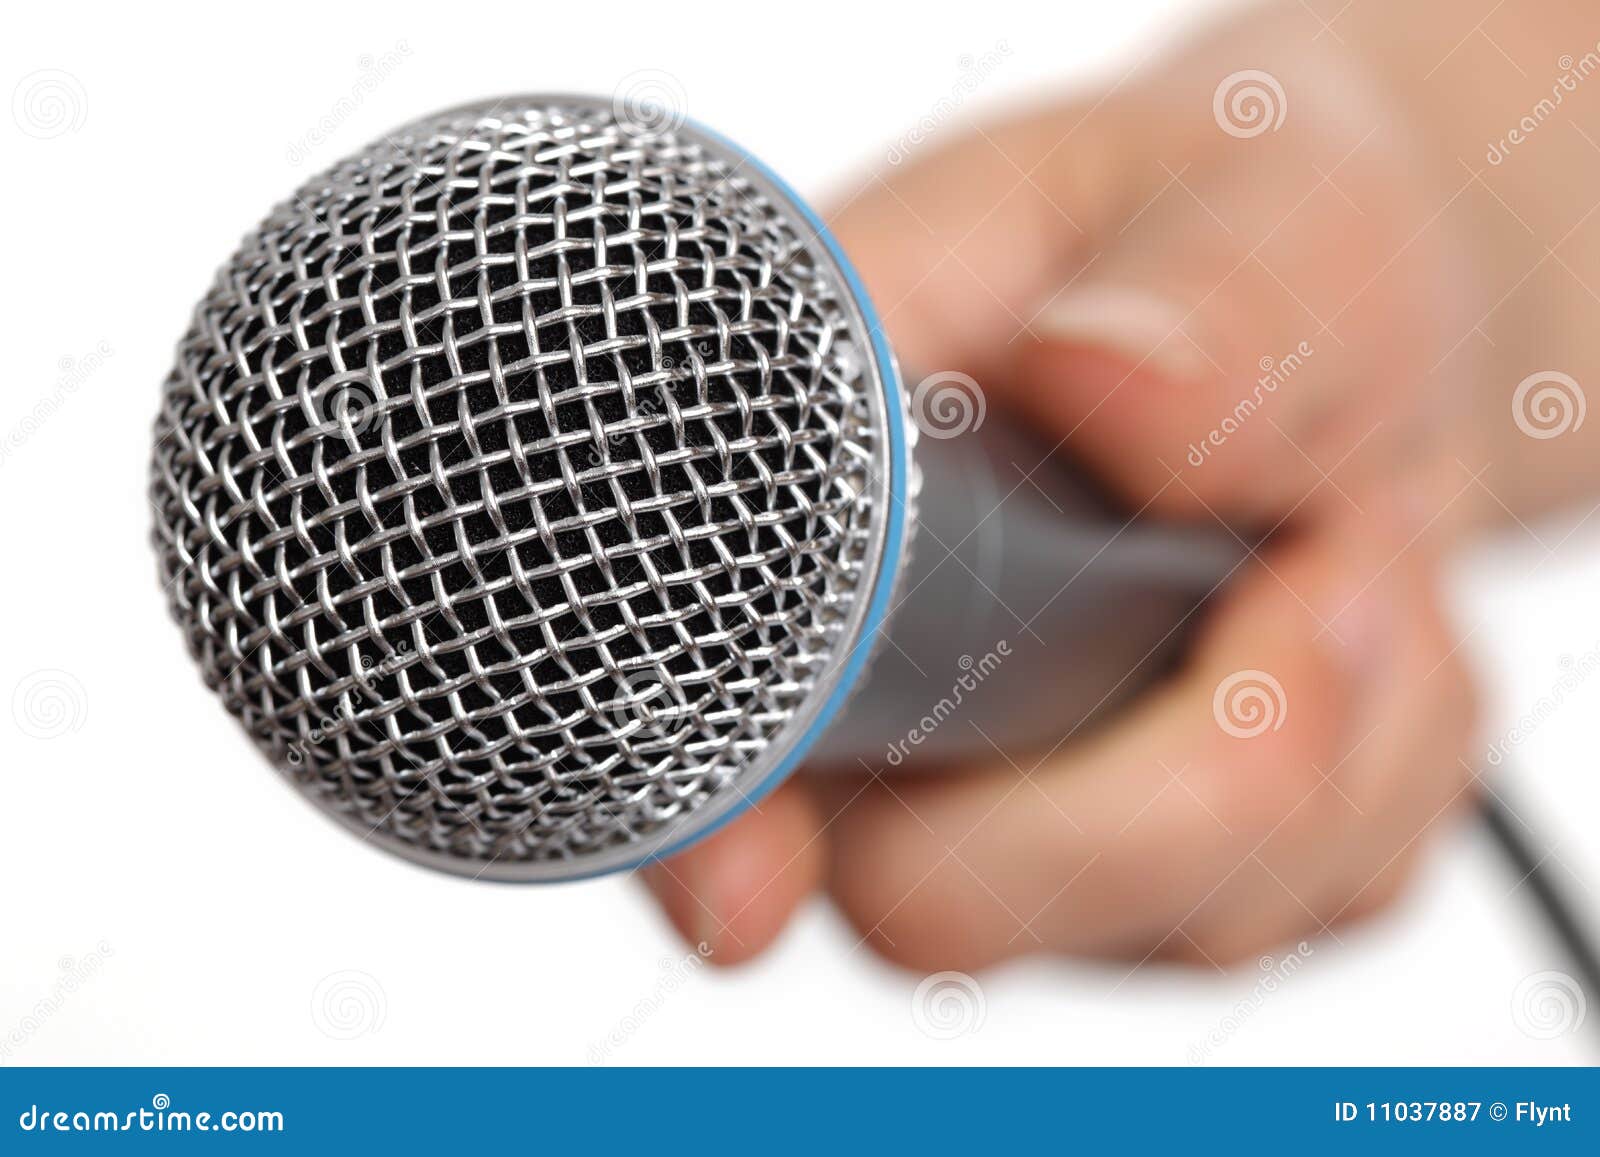 Interview with microphone Stock Photo